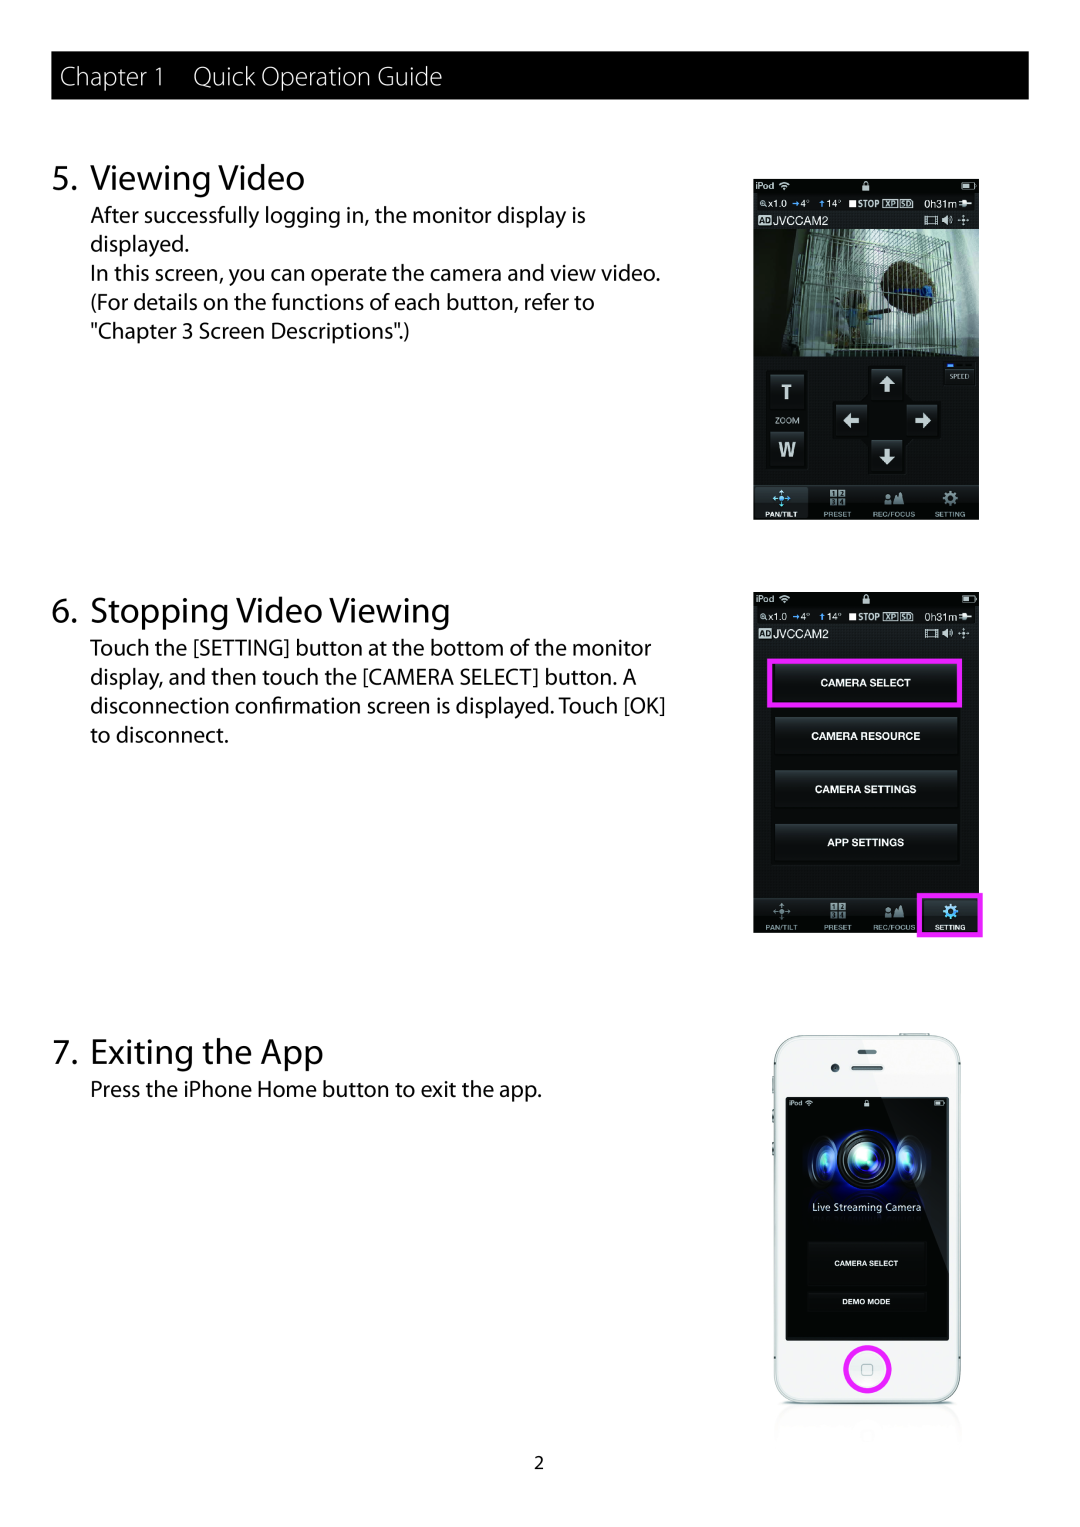 JVC GV-LS1, GV-LS2 instruction manual Viewing Video, Stopping Video Viewing, Exiting the App, Quick Operation Guide 